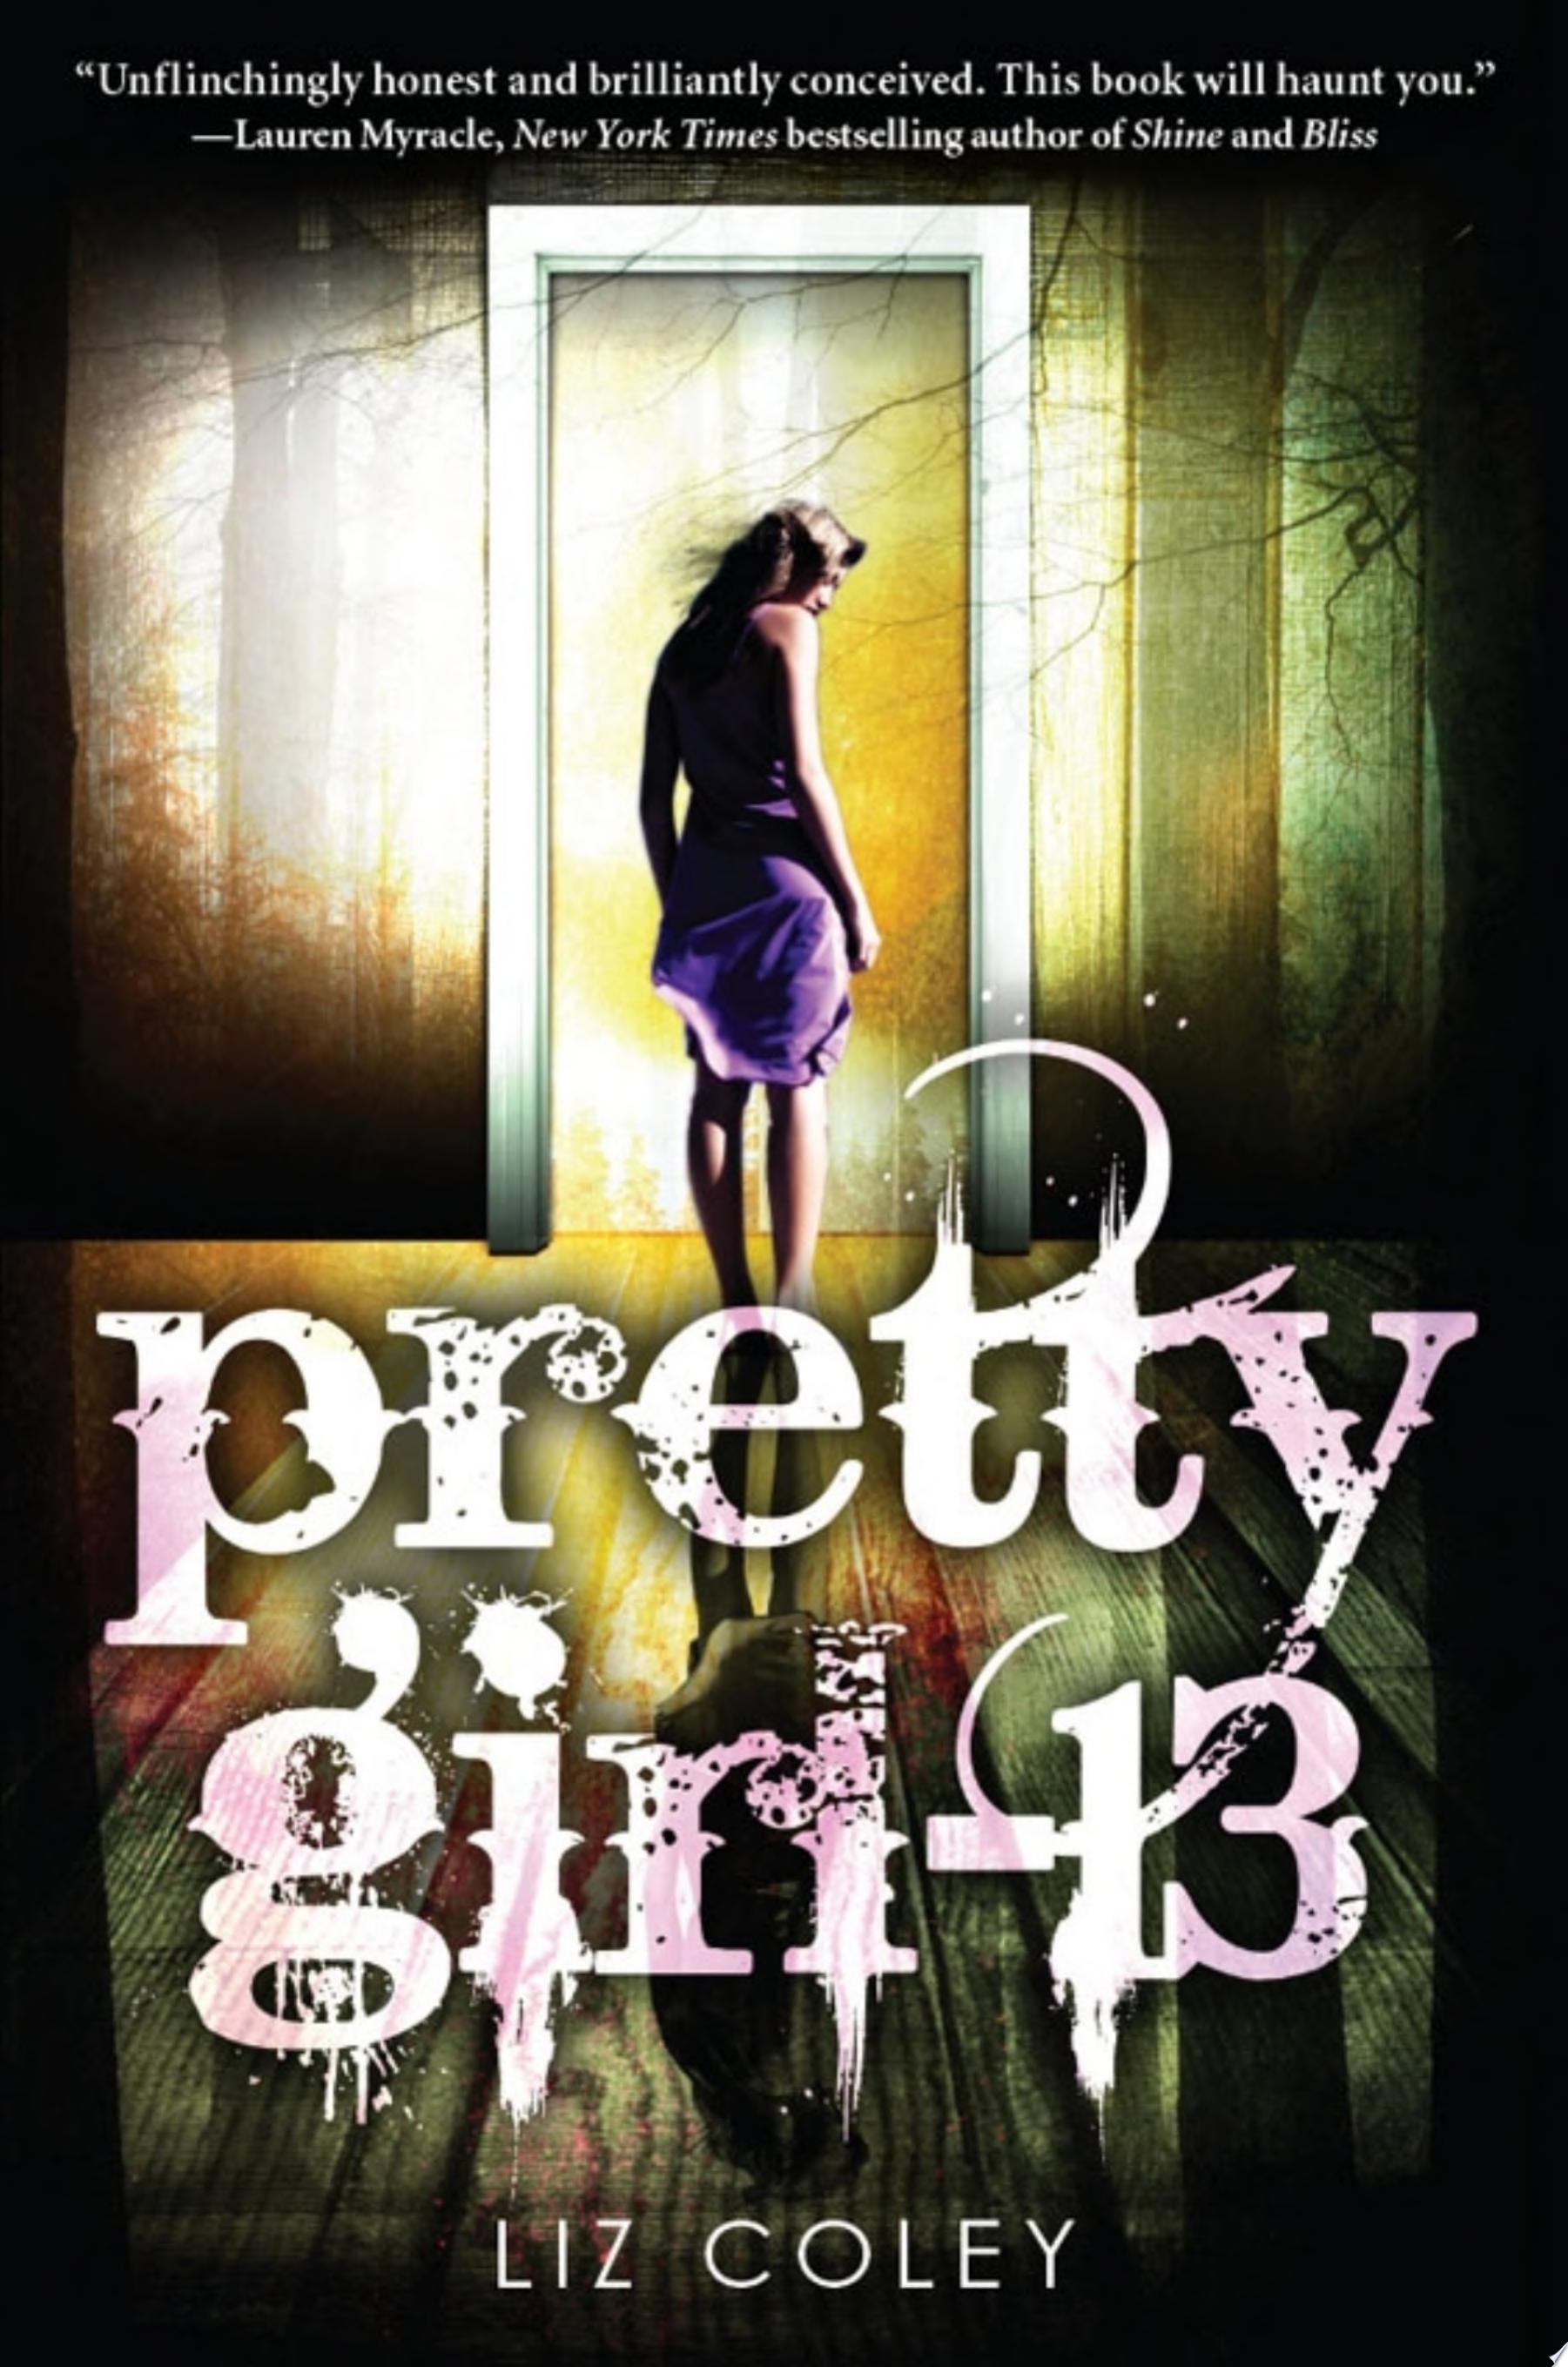 Image for "Pretty Girl-13"